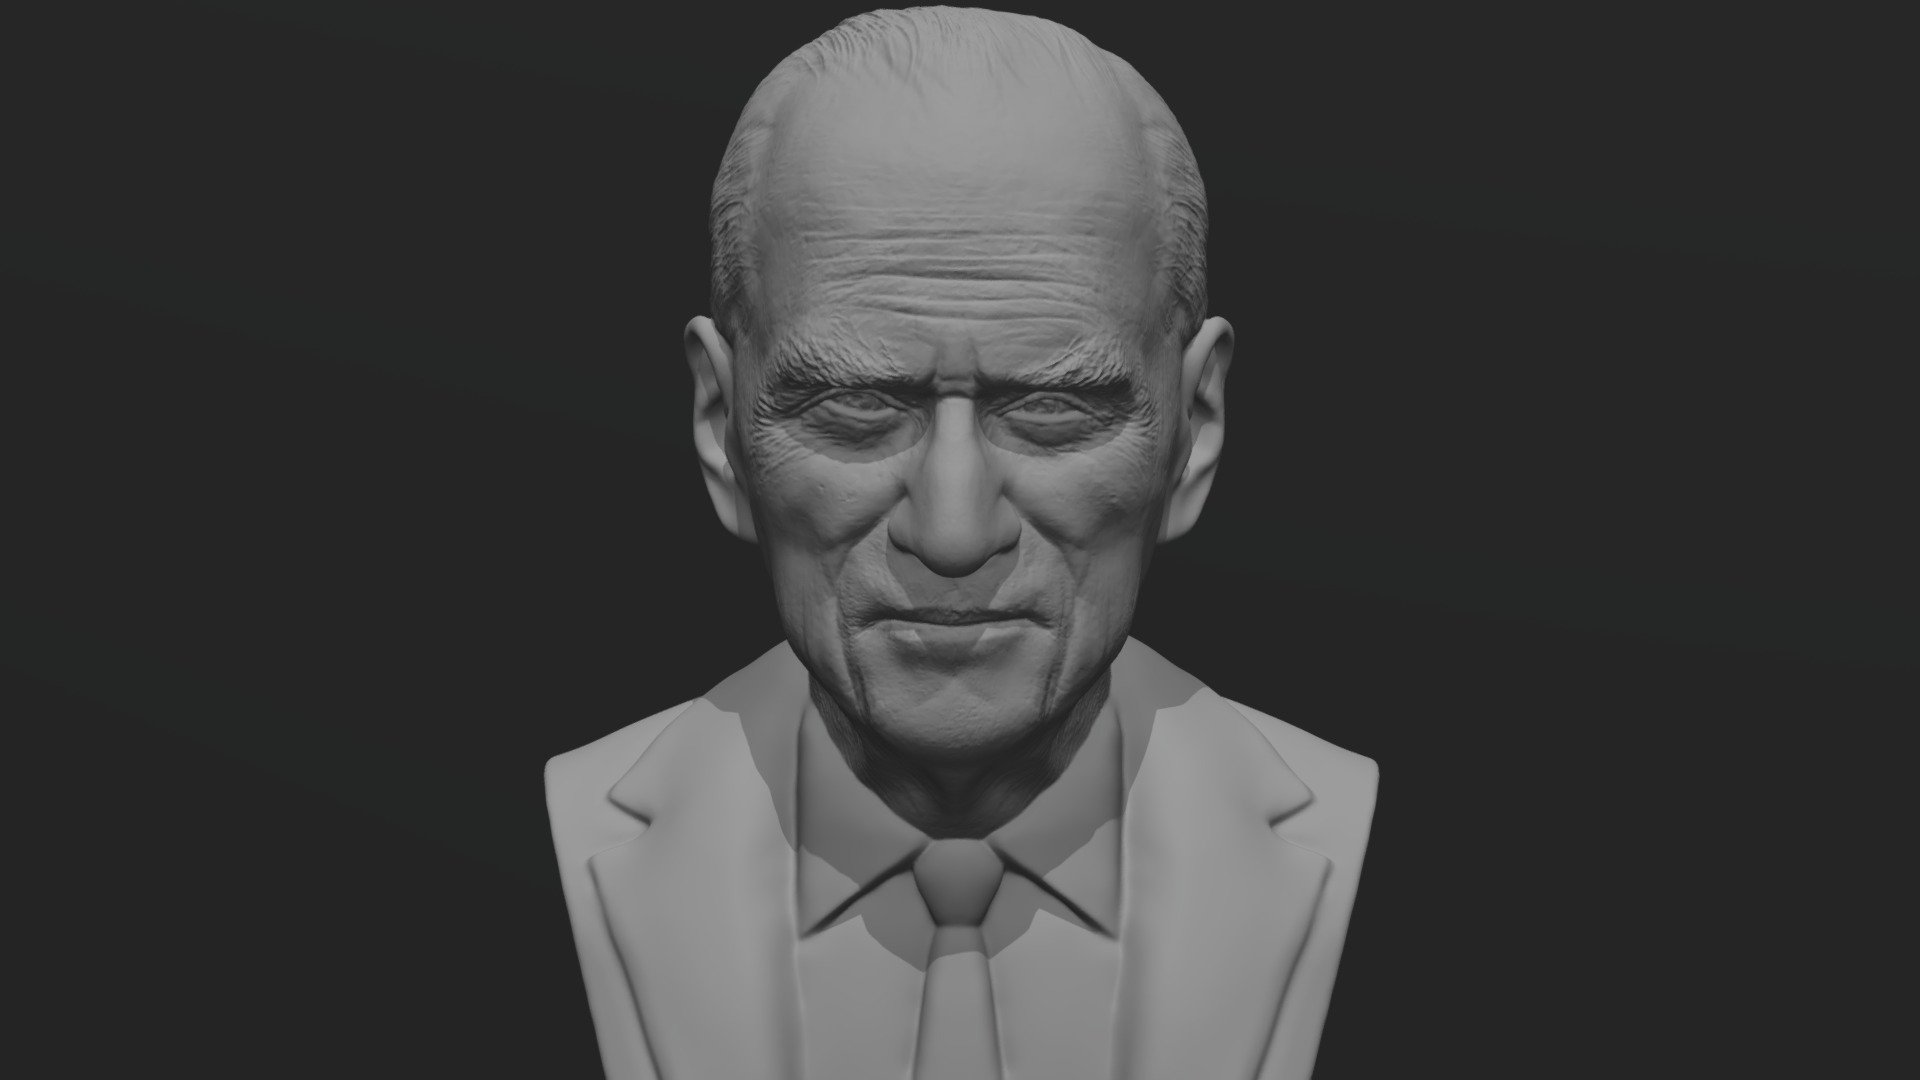 Here is Prince Philip bust 3D model ready for 3D printing. The model current size is 5 cm height, but you are free to scale it. Zip file contains stl. The model was created in ZBrush.

If you have any questions please don’t hesitate to contact me. I will respond you ASAP. I encourage you to check my other celebrity 3D models 3d model